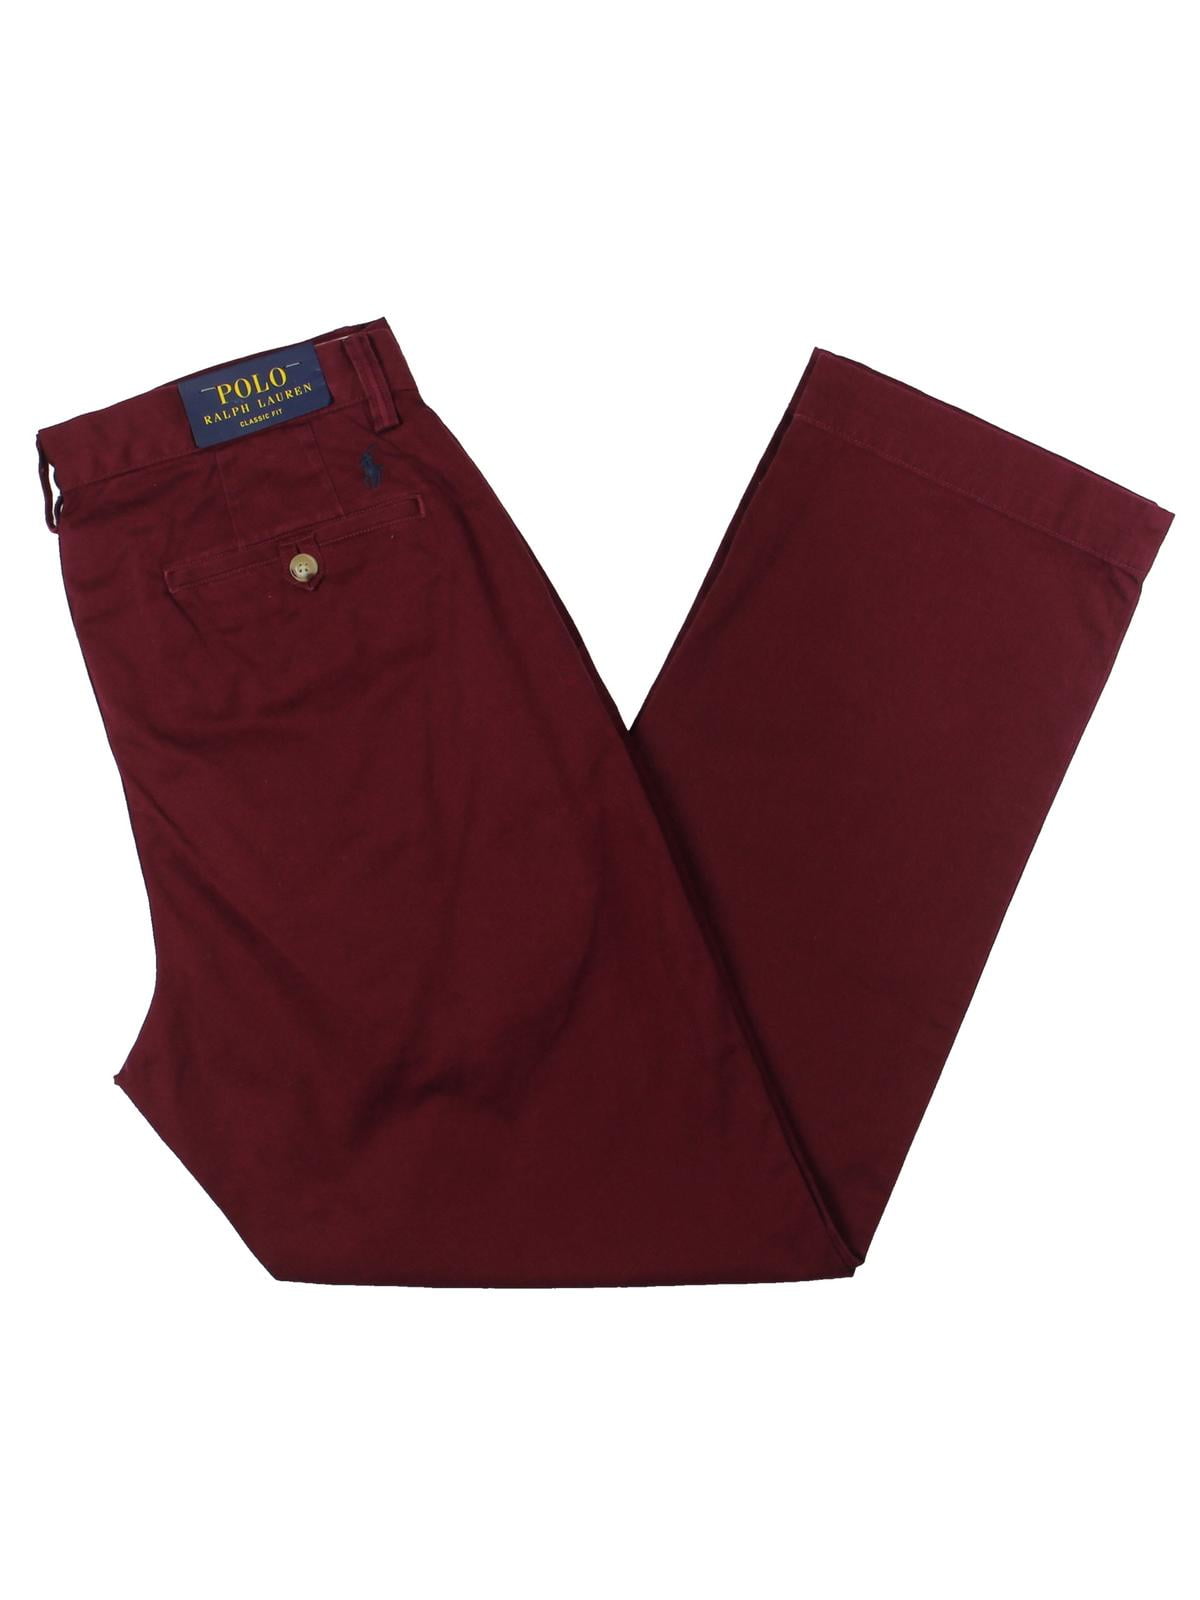 Polo Ralph Lauren Mens NANTUCKET RED Chinos Pant 33 X 30 Classic Fit Stretch  NWT | eBay